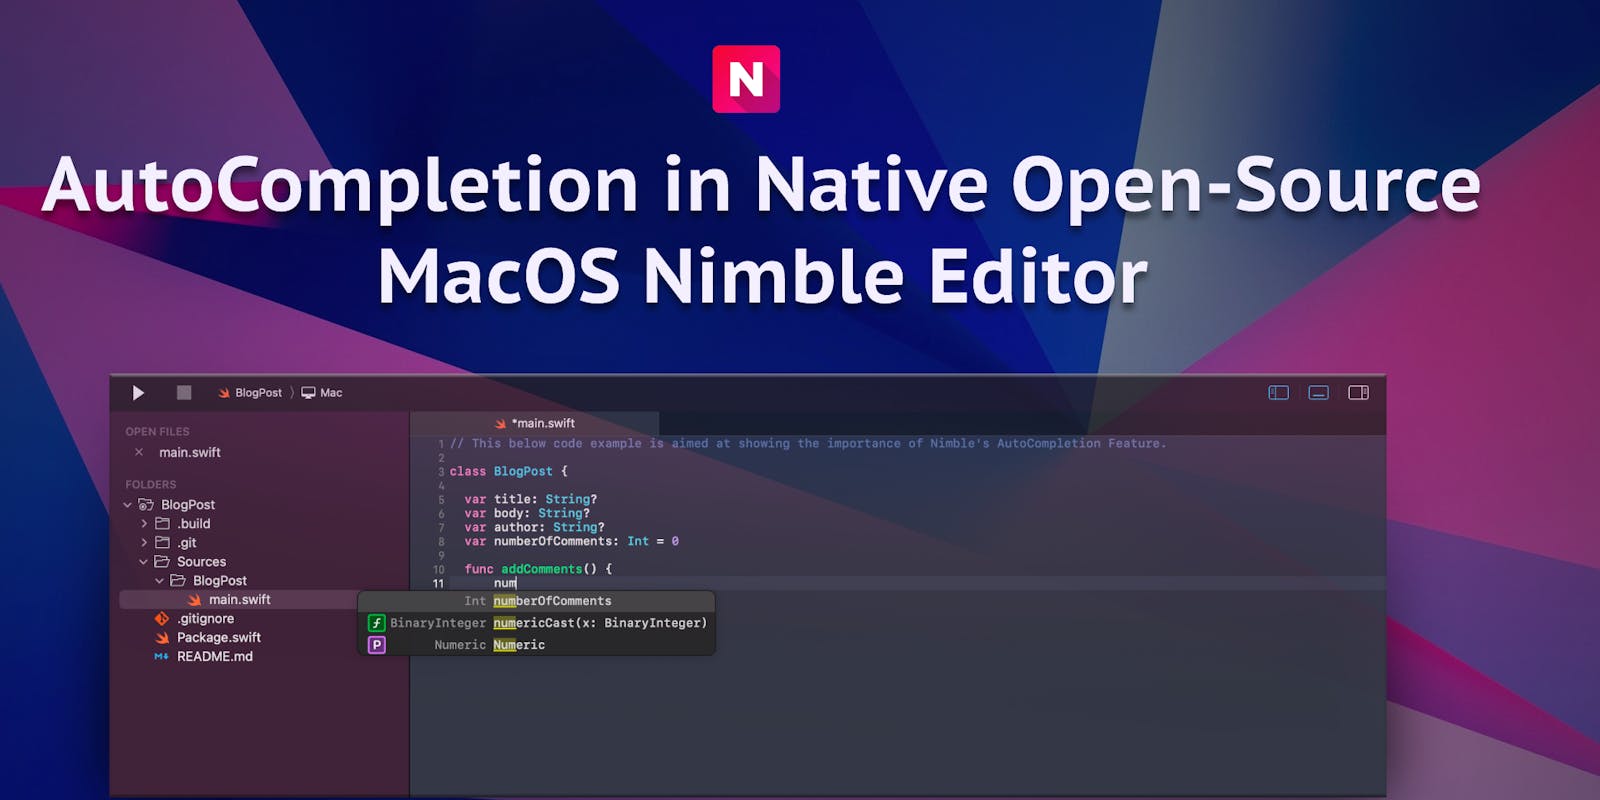 AutoCompletion in Native Open-Source MacOS Nimble Editor